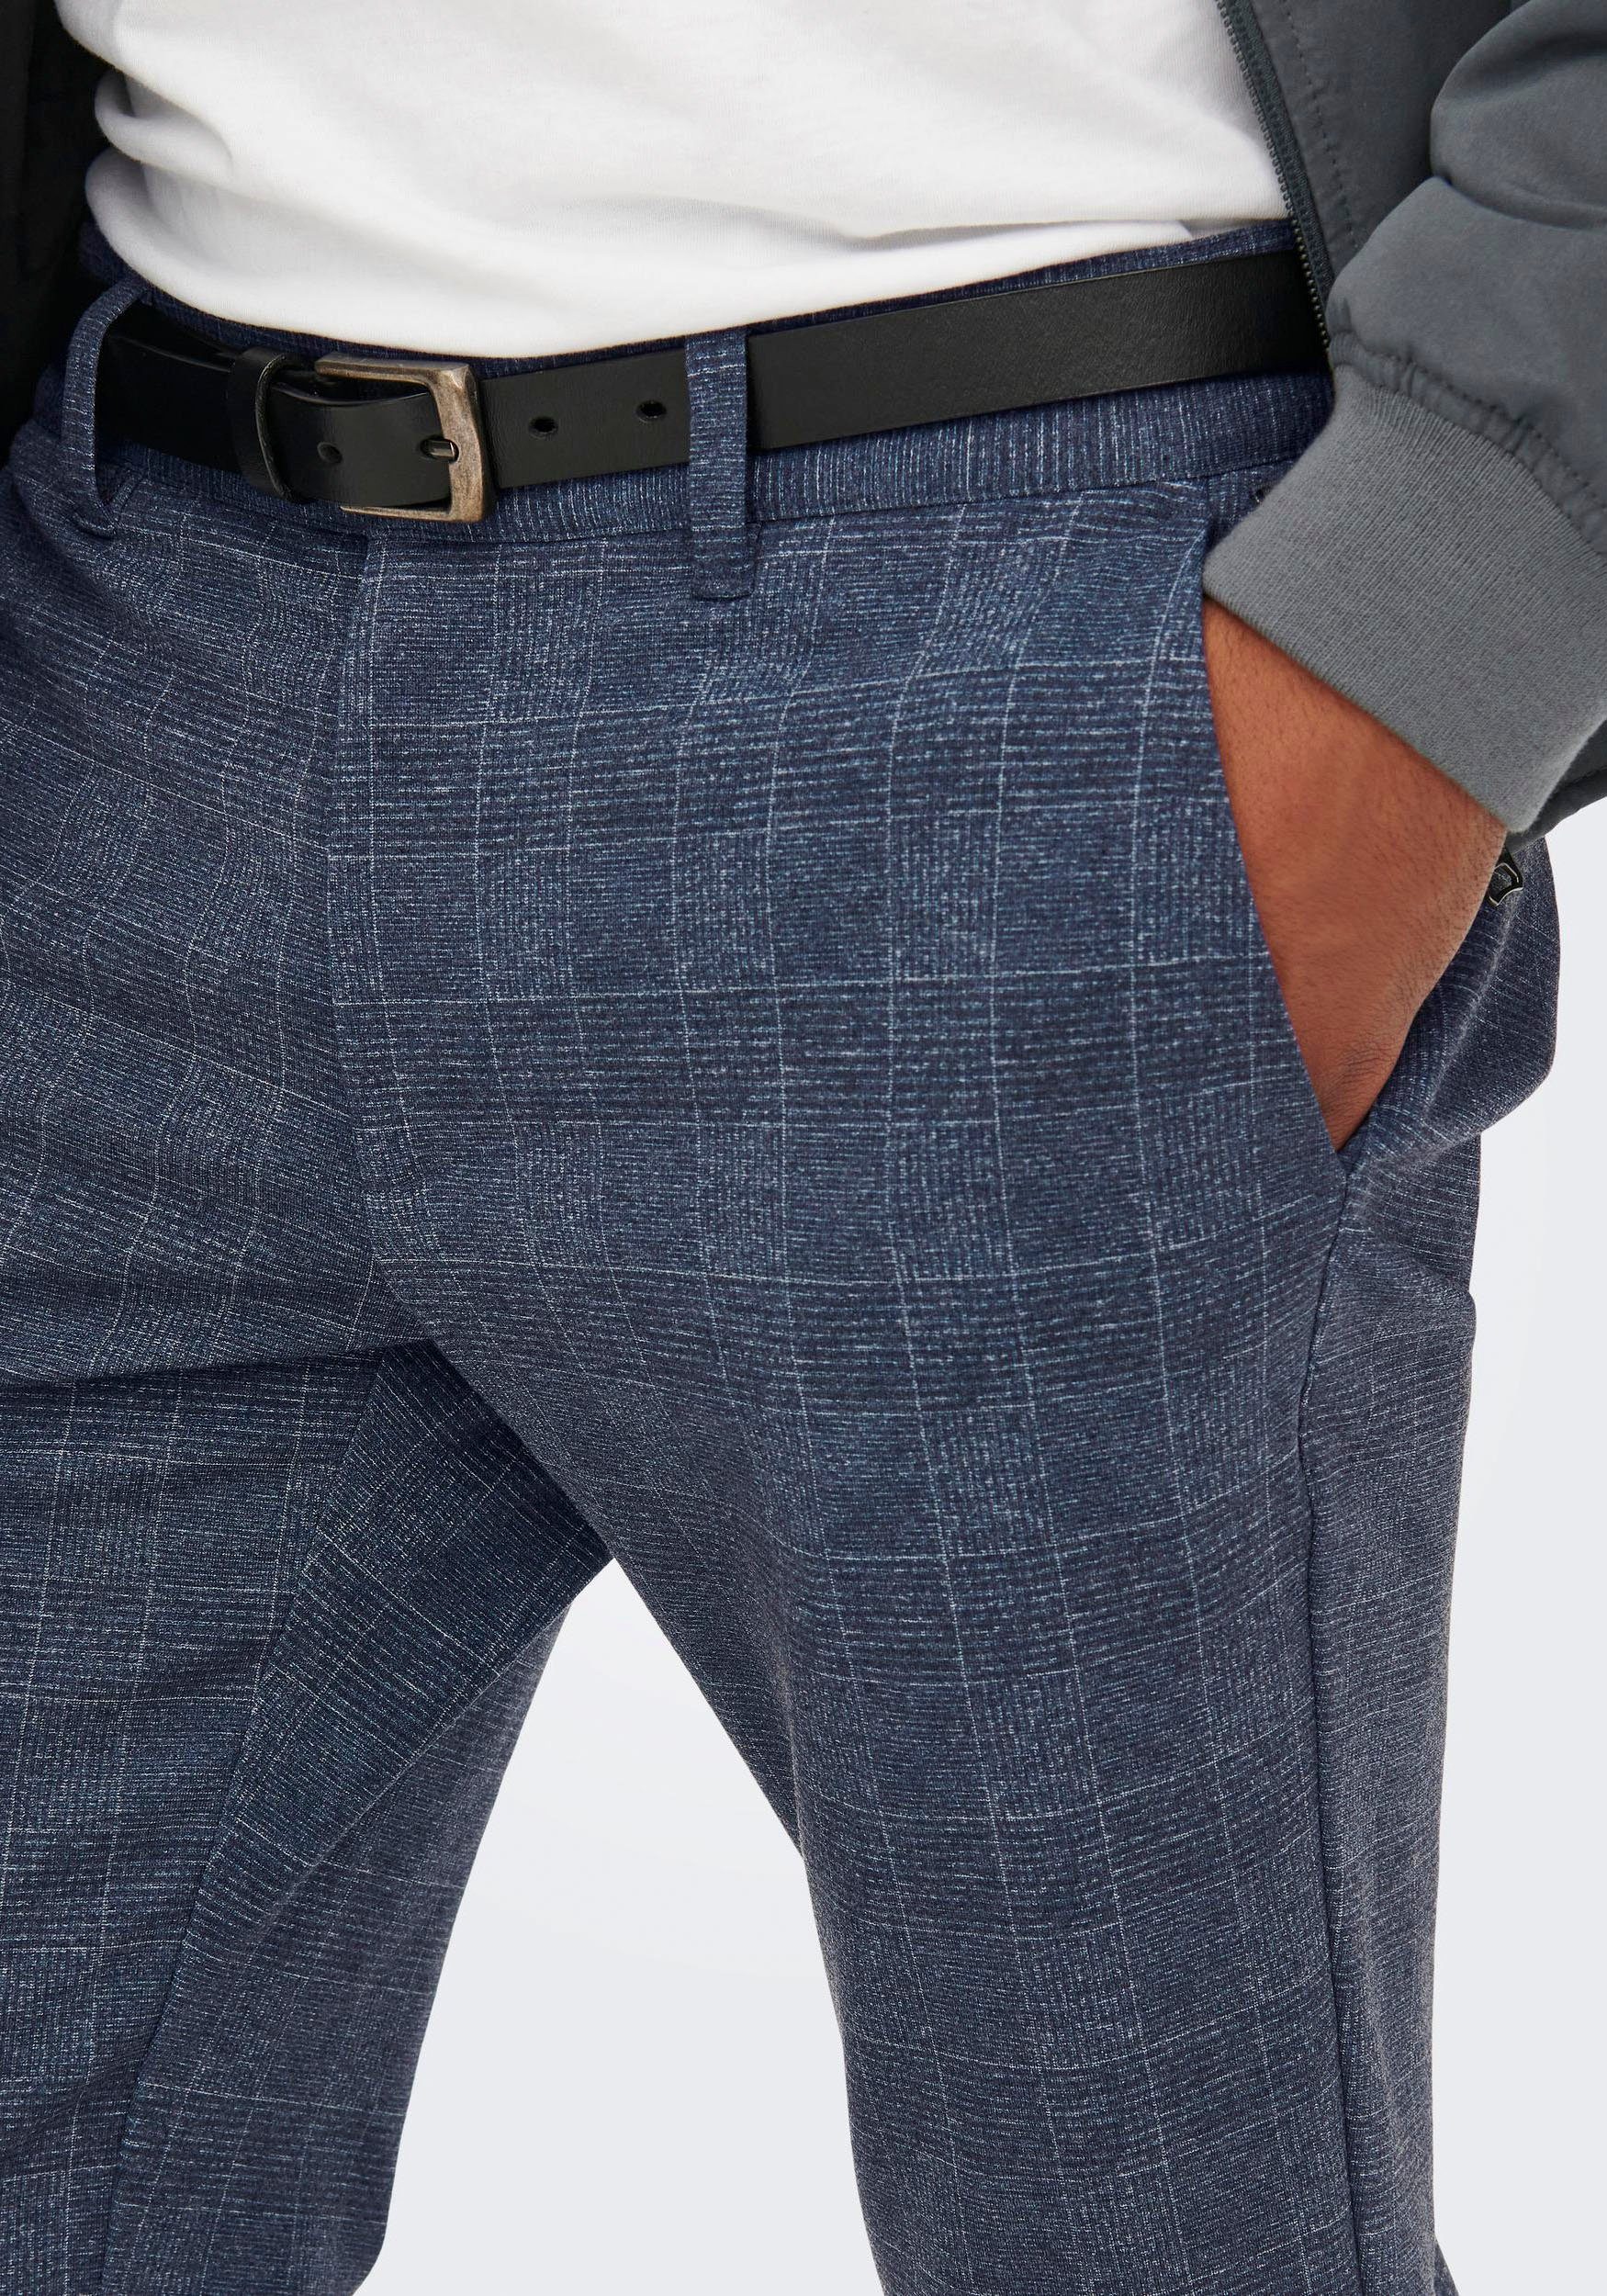 blau ONLY Chinohose CHECK MARK PANTS kariert & SONS